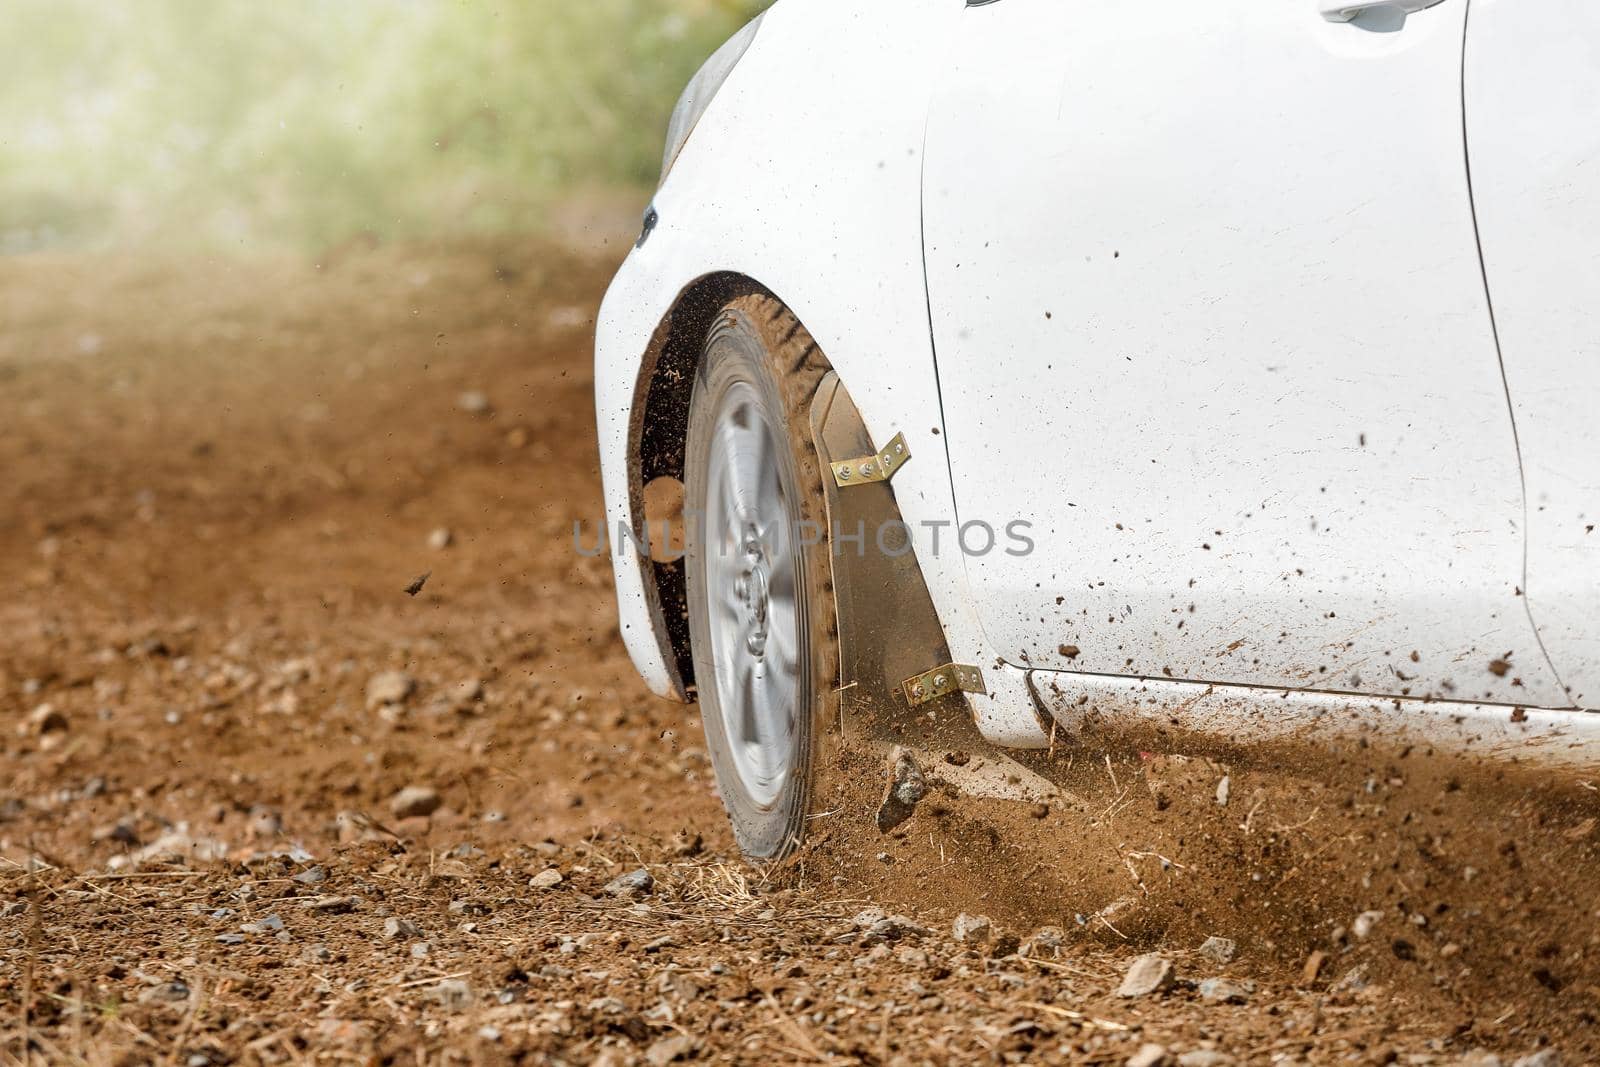 Rally Car in dirt track by toa55